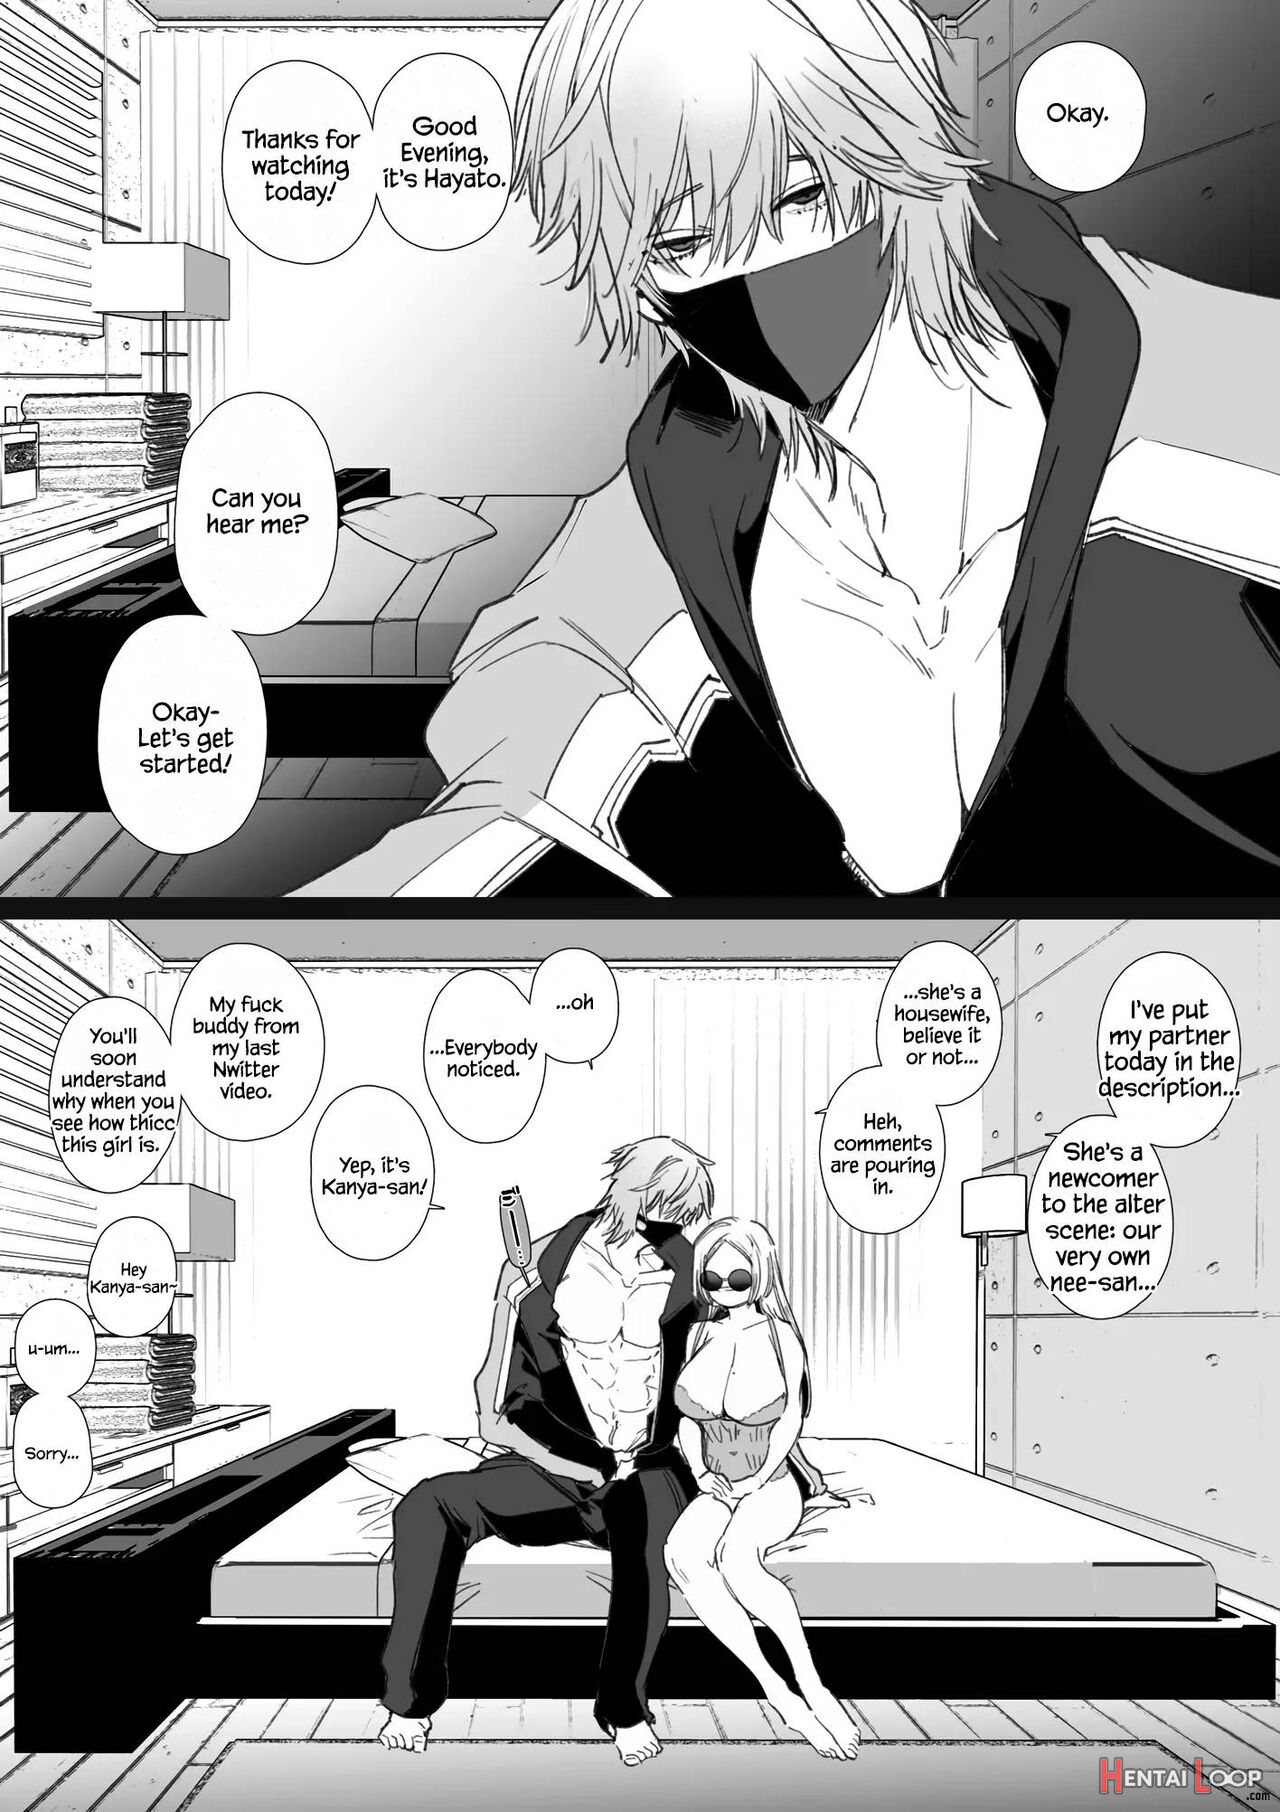 Kana-san Ntr ~ Degradation Of A Housewife By A Guy In An Alter Account ~ page 63